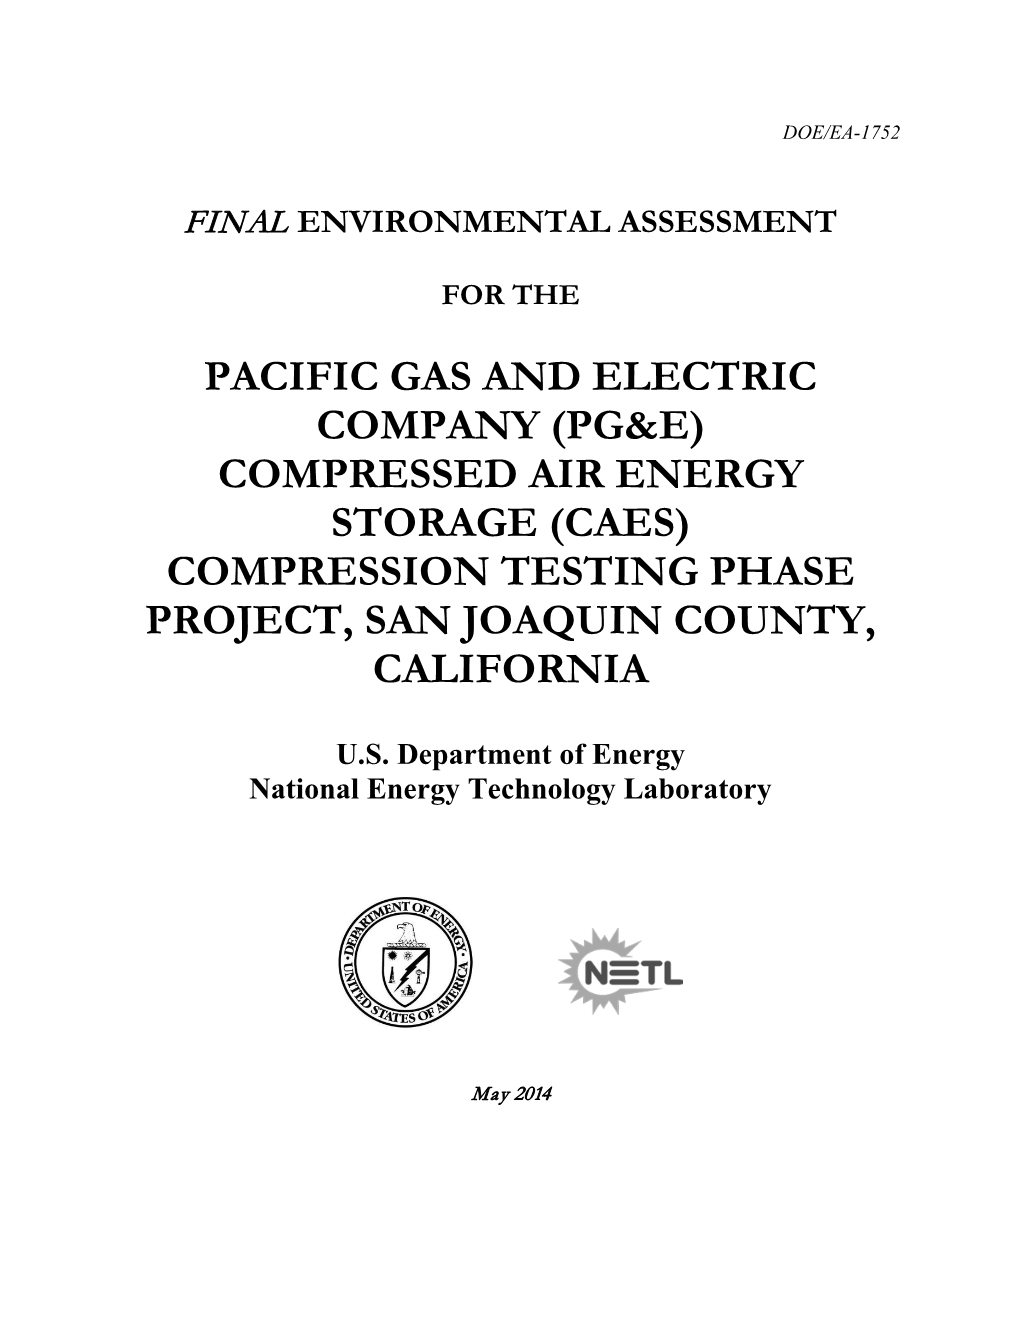 Compressed Air Energy Storage (Caes) Compression Testing Phase Project, San Joaquin County, California